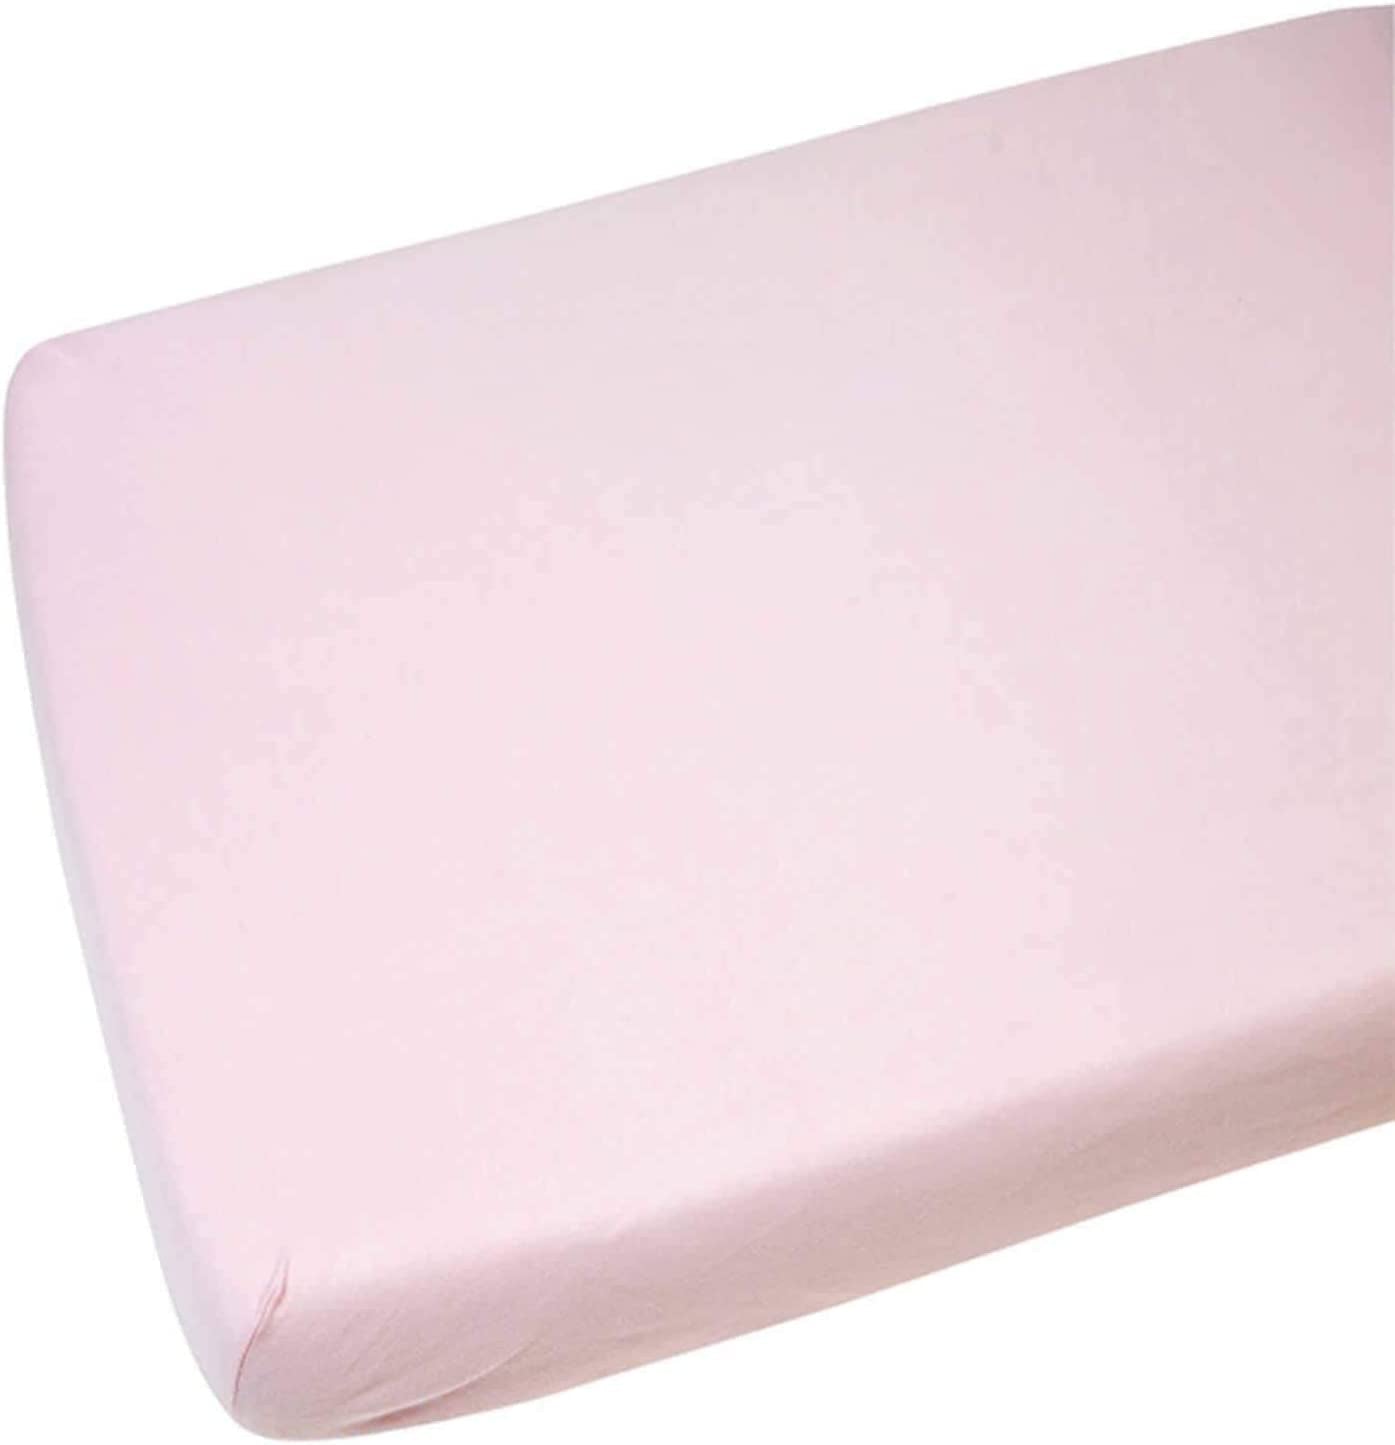 Dudu N Girlie - Cot Fitted Sheets 140 x 70cm | Bedding For Cot bed | Soft Jersey Cotton Baby Sheets 140 x 70 Fully Elasticated Skirt Breathable Easy Care (Single Pack, Pink)